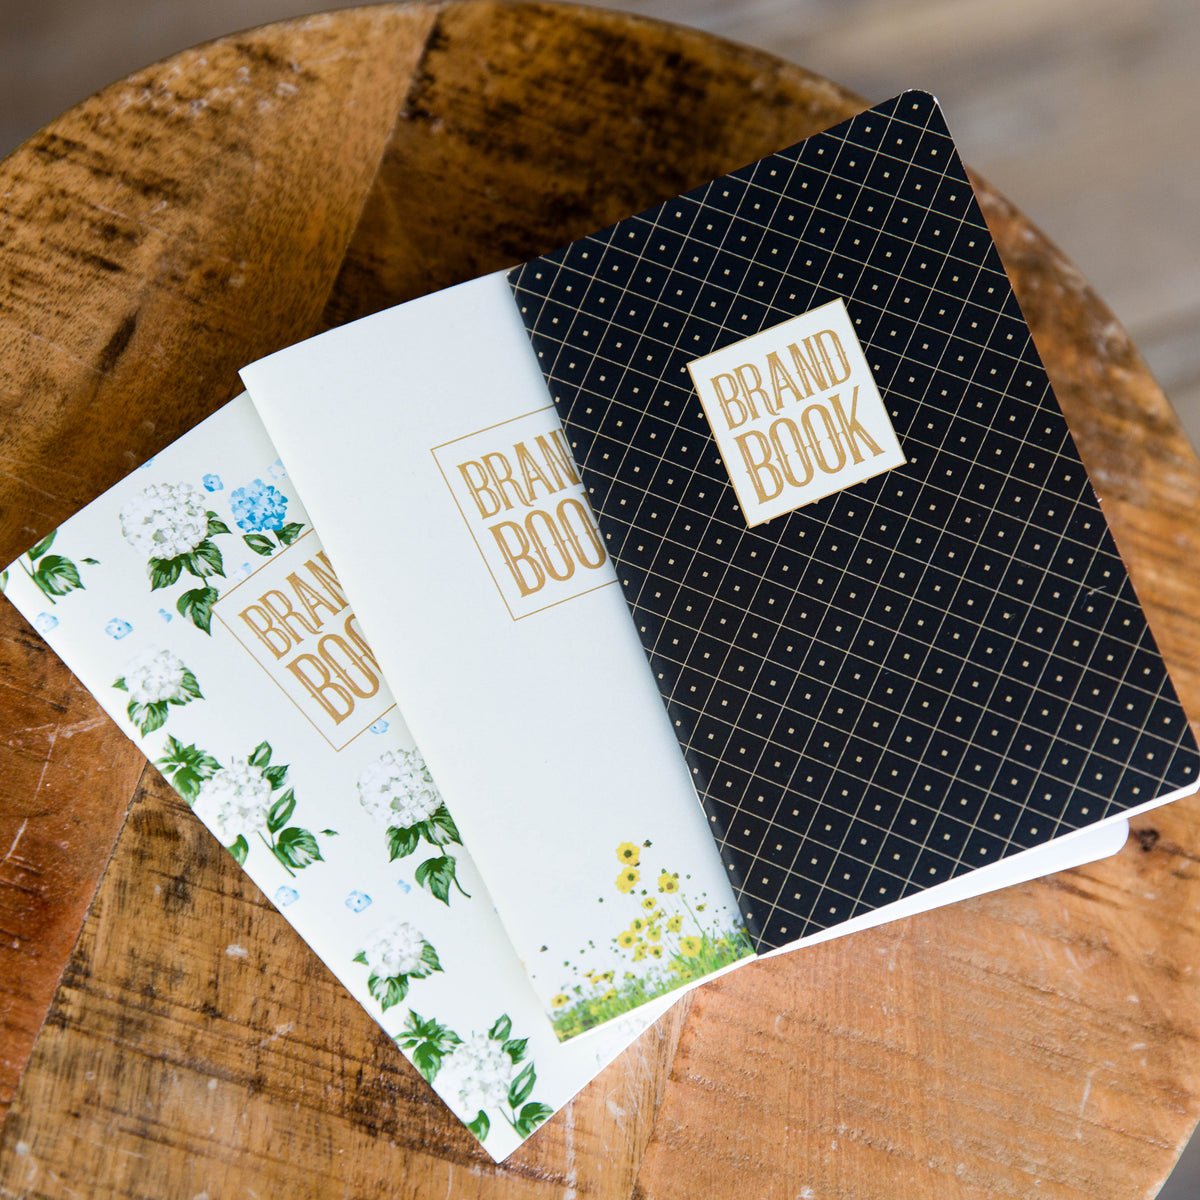 Three brand book notepads; one is black; one has flowers at the bottom; one is covered in a floral pattern